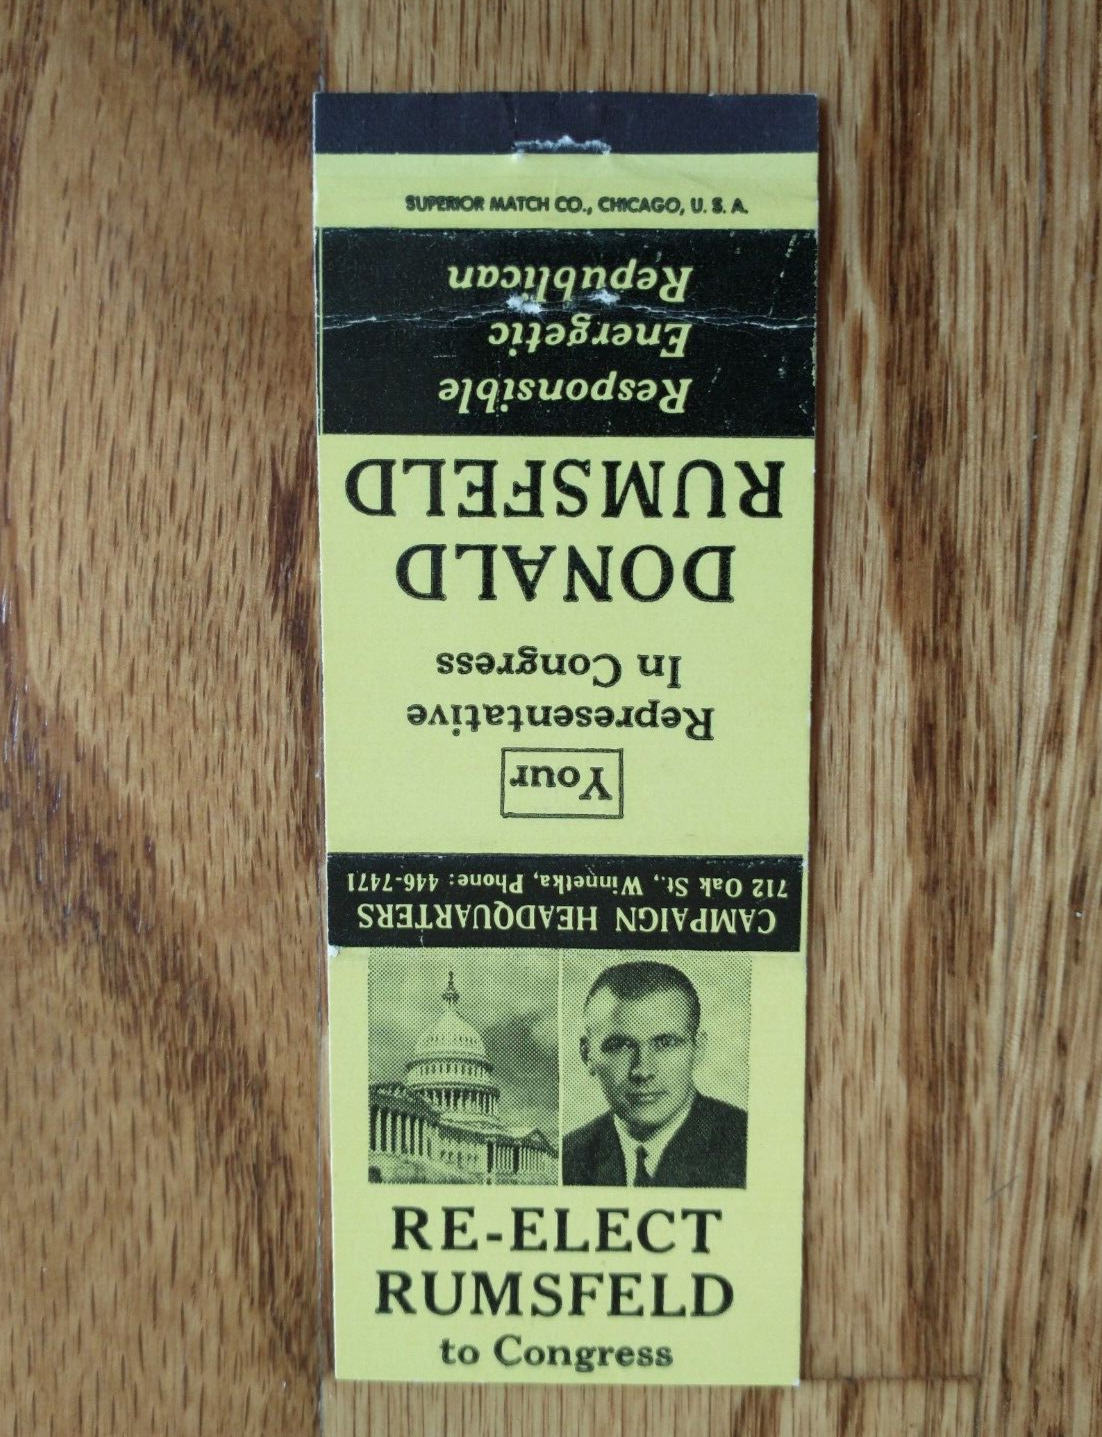 Re-Elect Donald Rumsfeld to Congress Political Vintage Matchbook Cover Niles IL